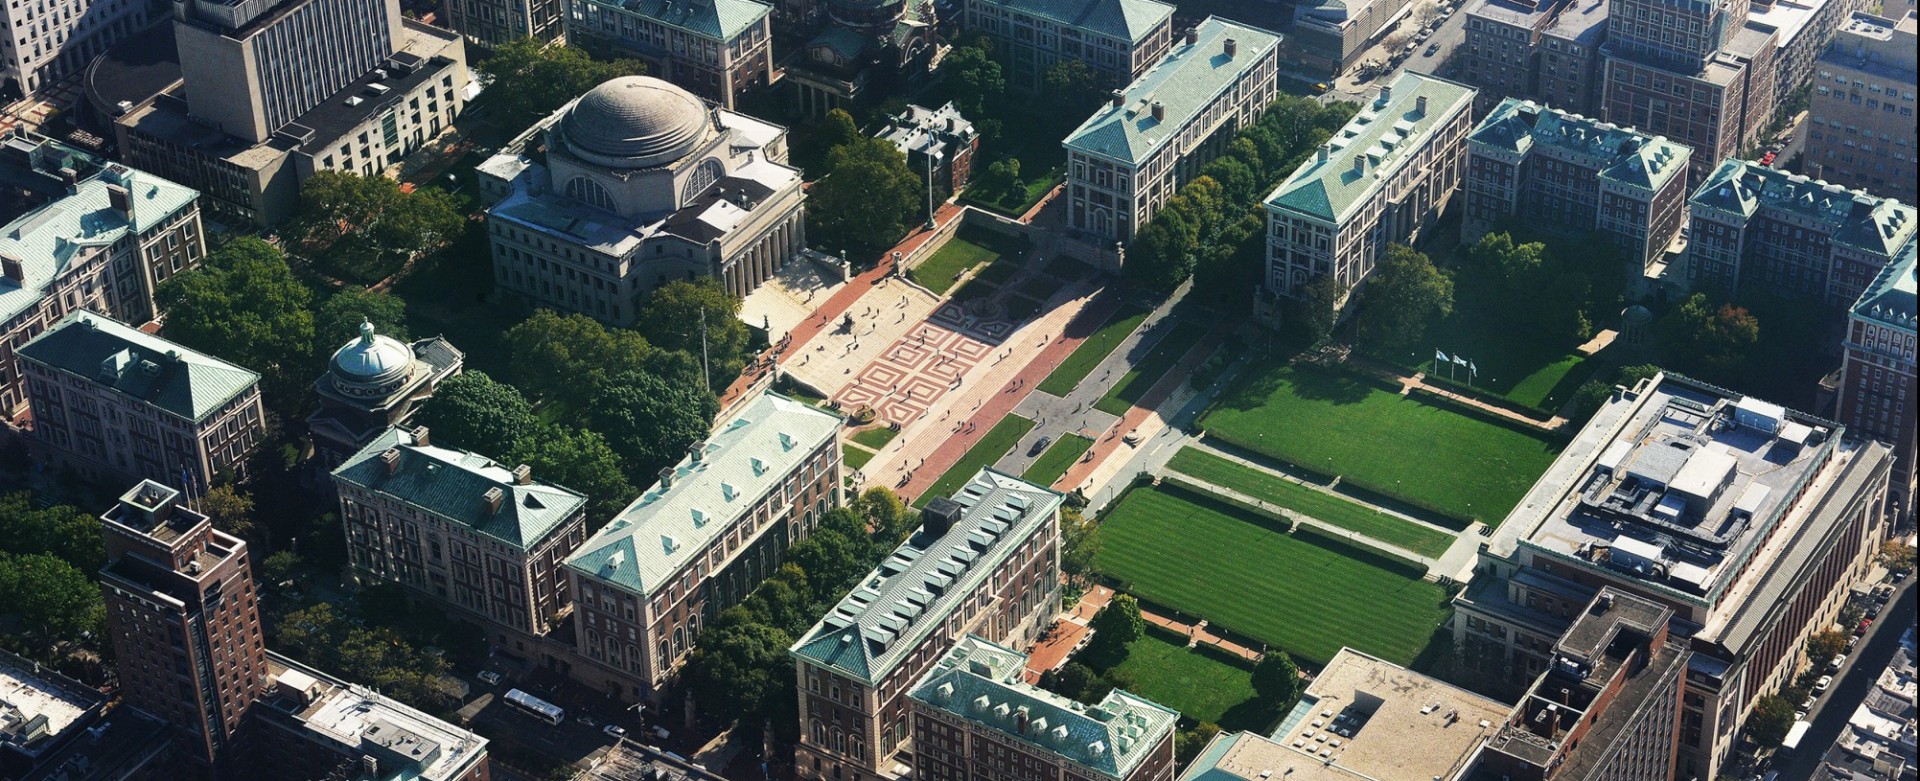 Aerial photo of Columbia's campus with Low Library and college walk at the center.